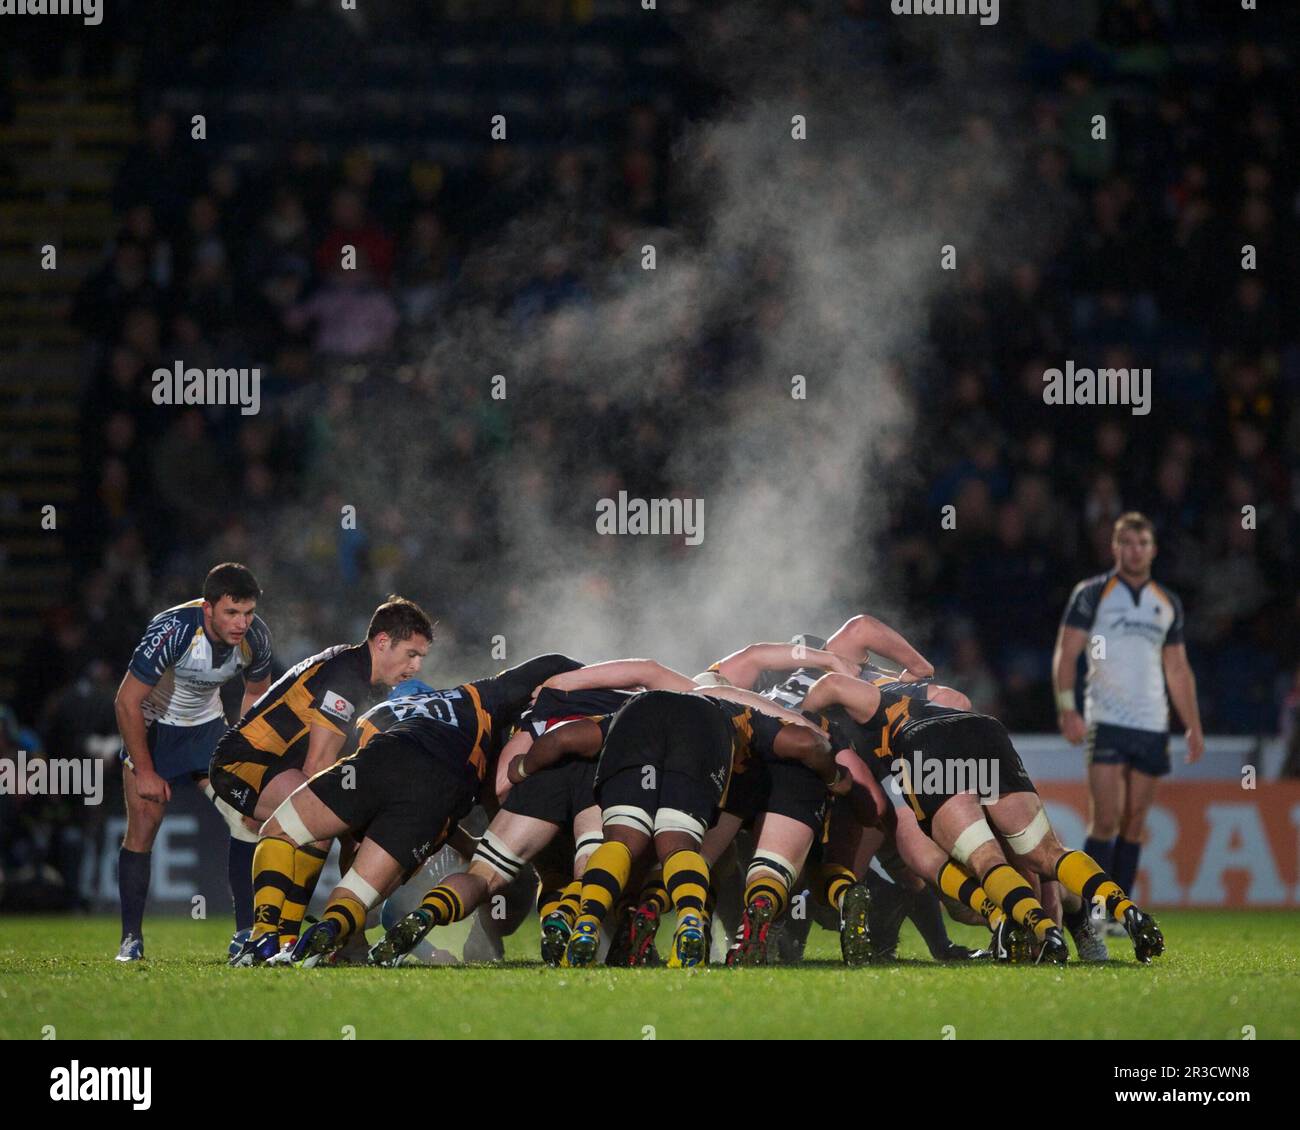 Charlie Davies of London Wasps puts the ball into a set scrum during the LV= Cup second round match between London Wasps and Worcester Warriors at Ada Stock Photo